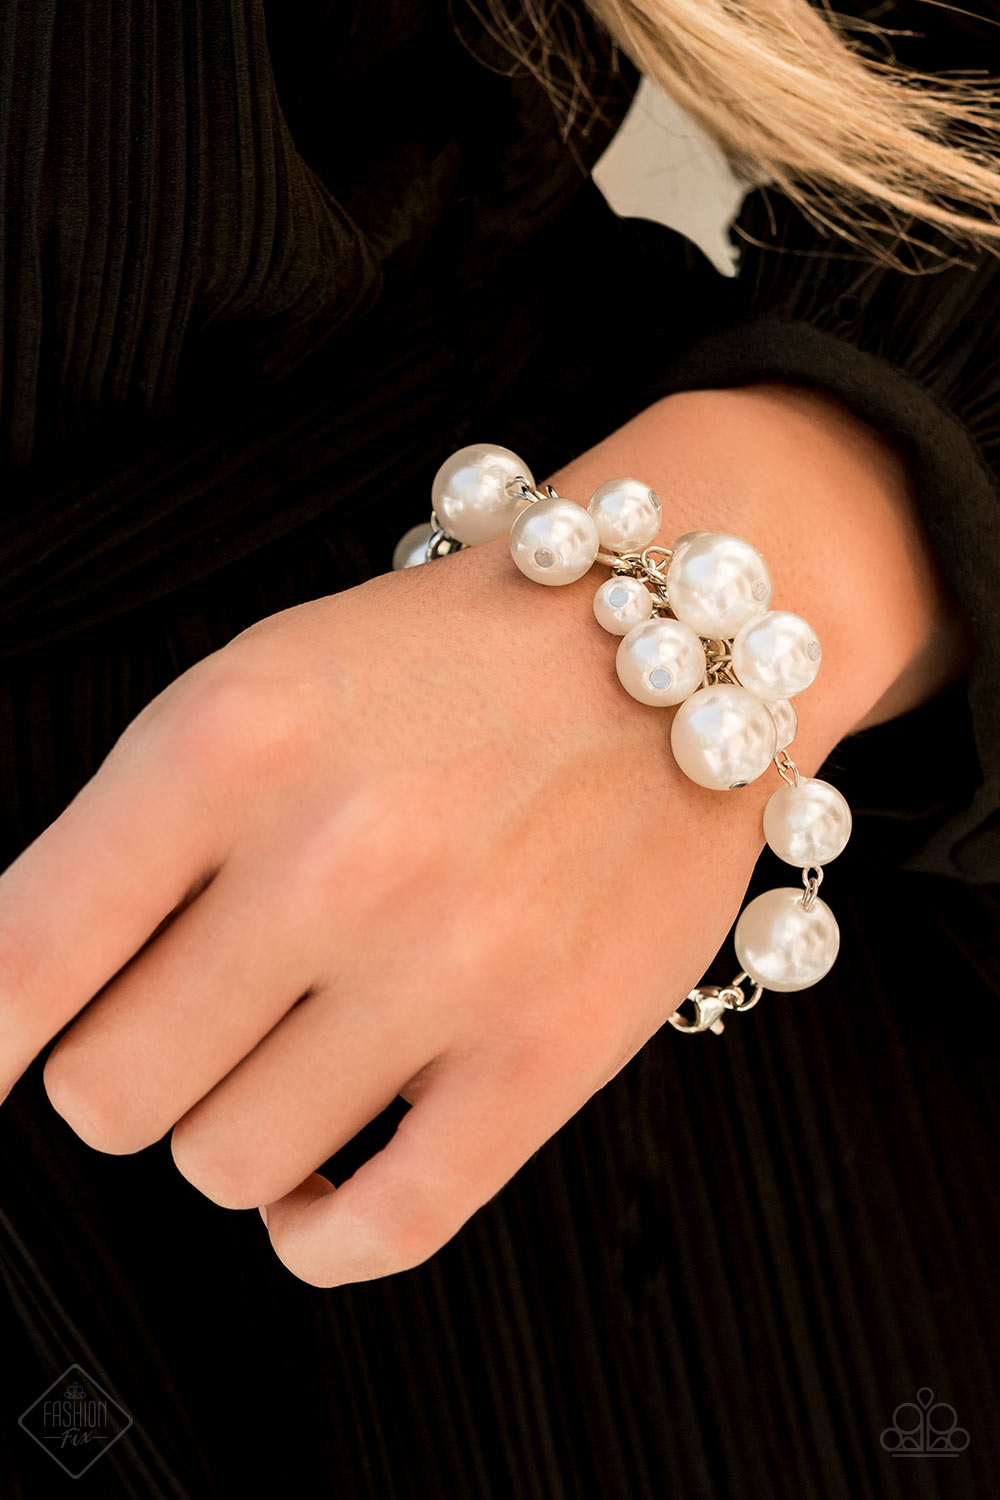 Girls in Pearls Fashion Fix White Bracelet November 2019 - TheMasterCollection